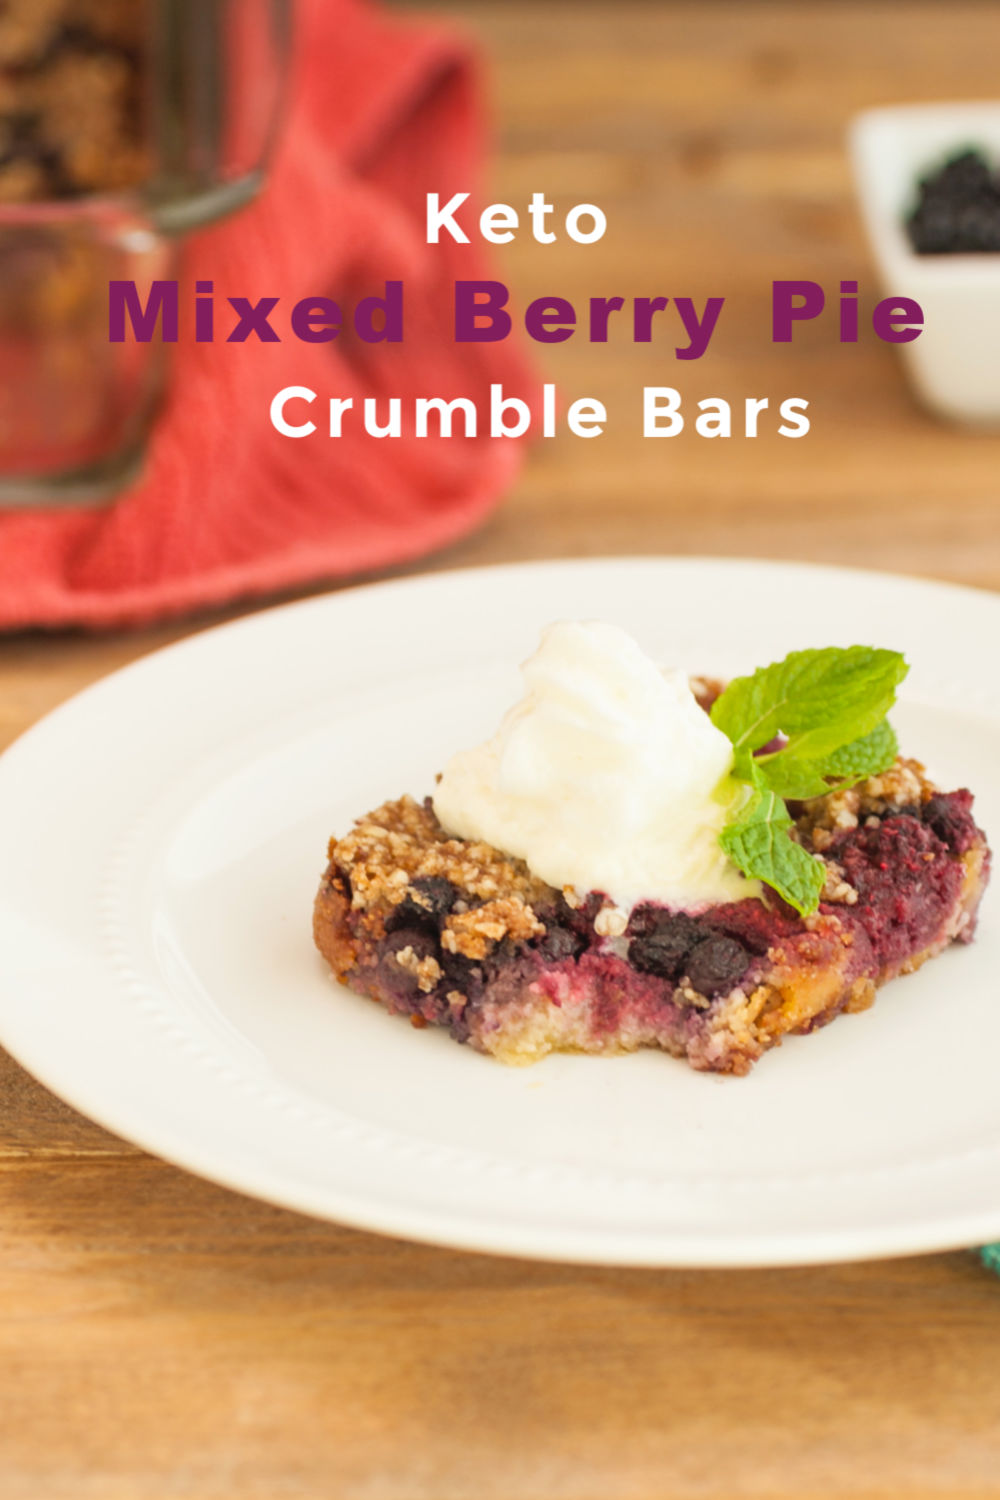 Mixed Berry Pie Crumble Bars Keto & Low Carb